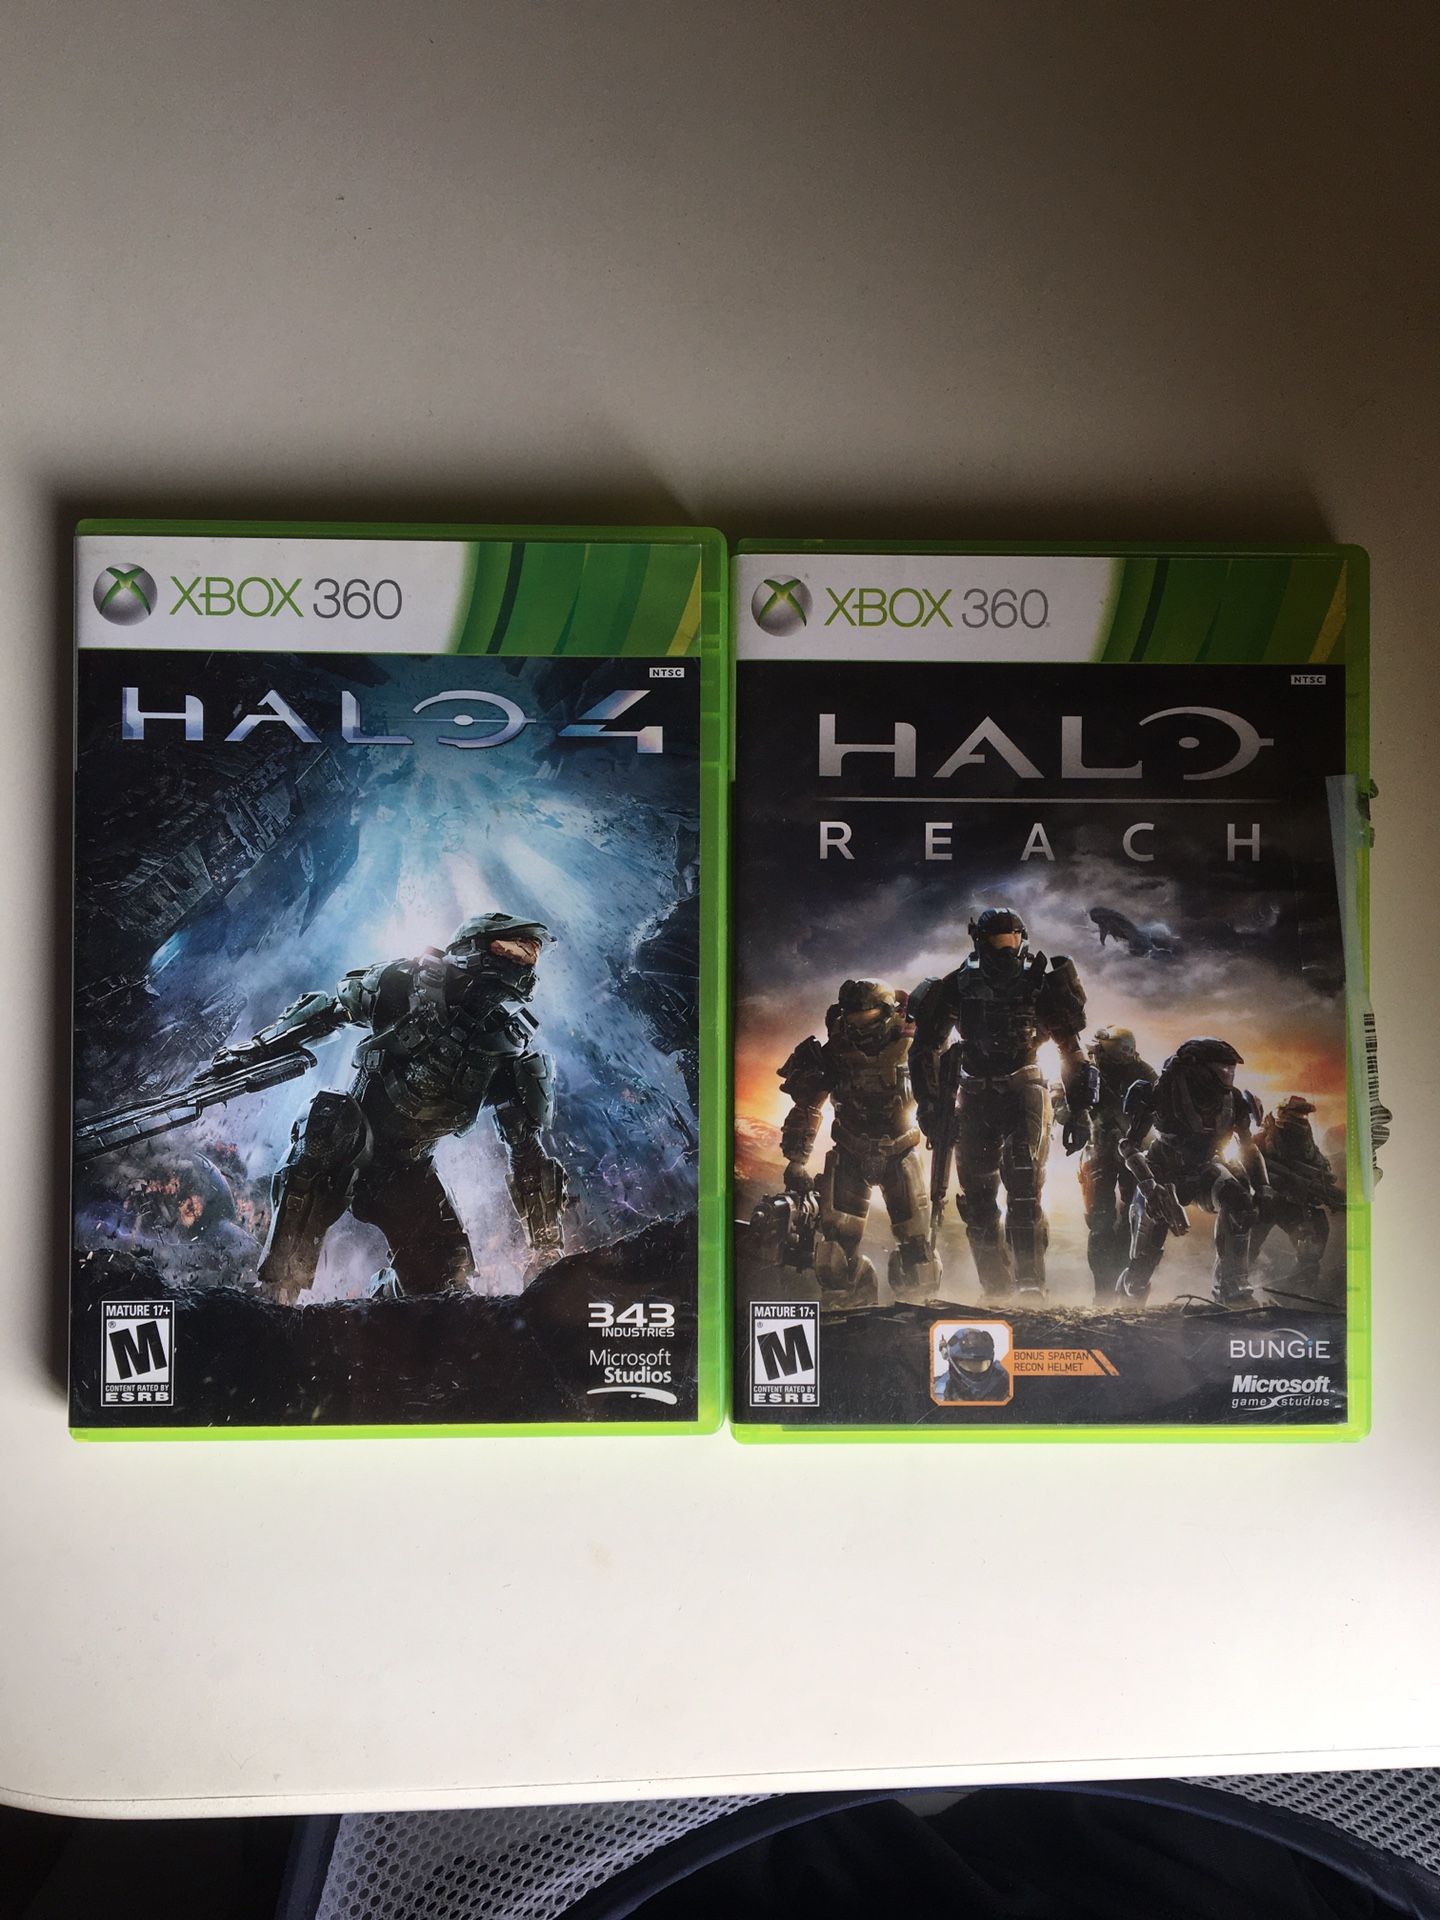 Halo 4 Halo Reach Video Games for Xbox 360